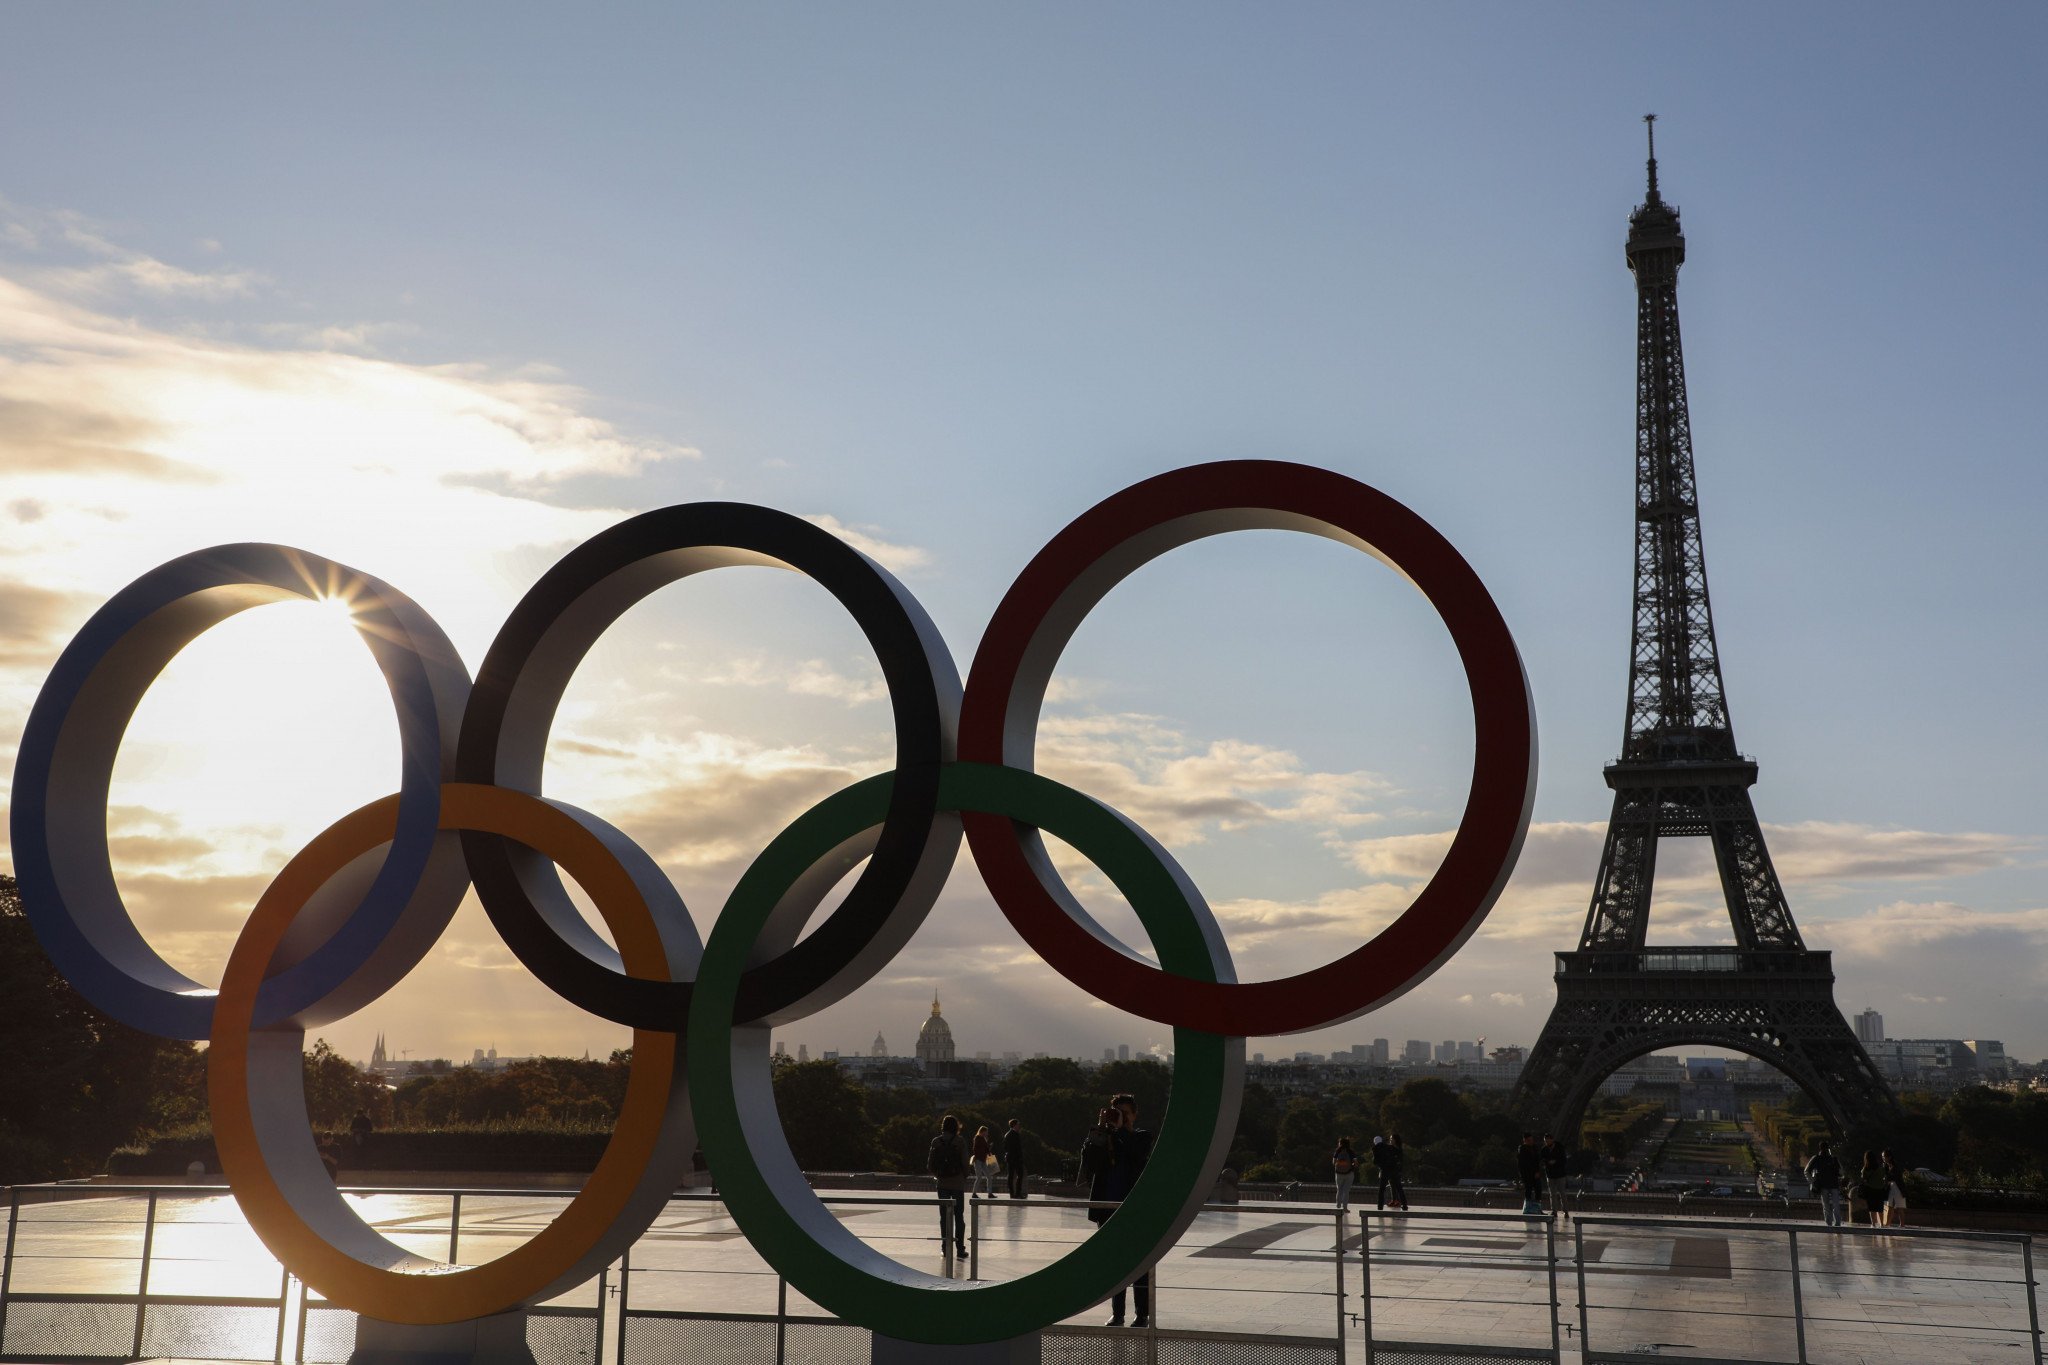 Drone threat hovers over Paris Olympics